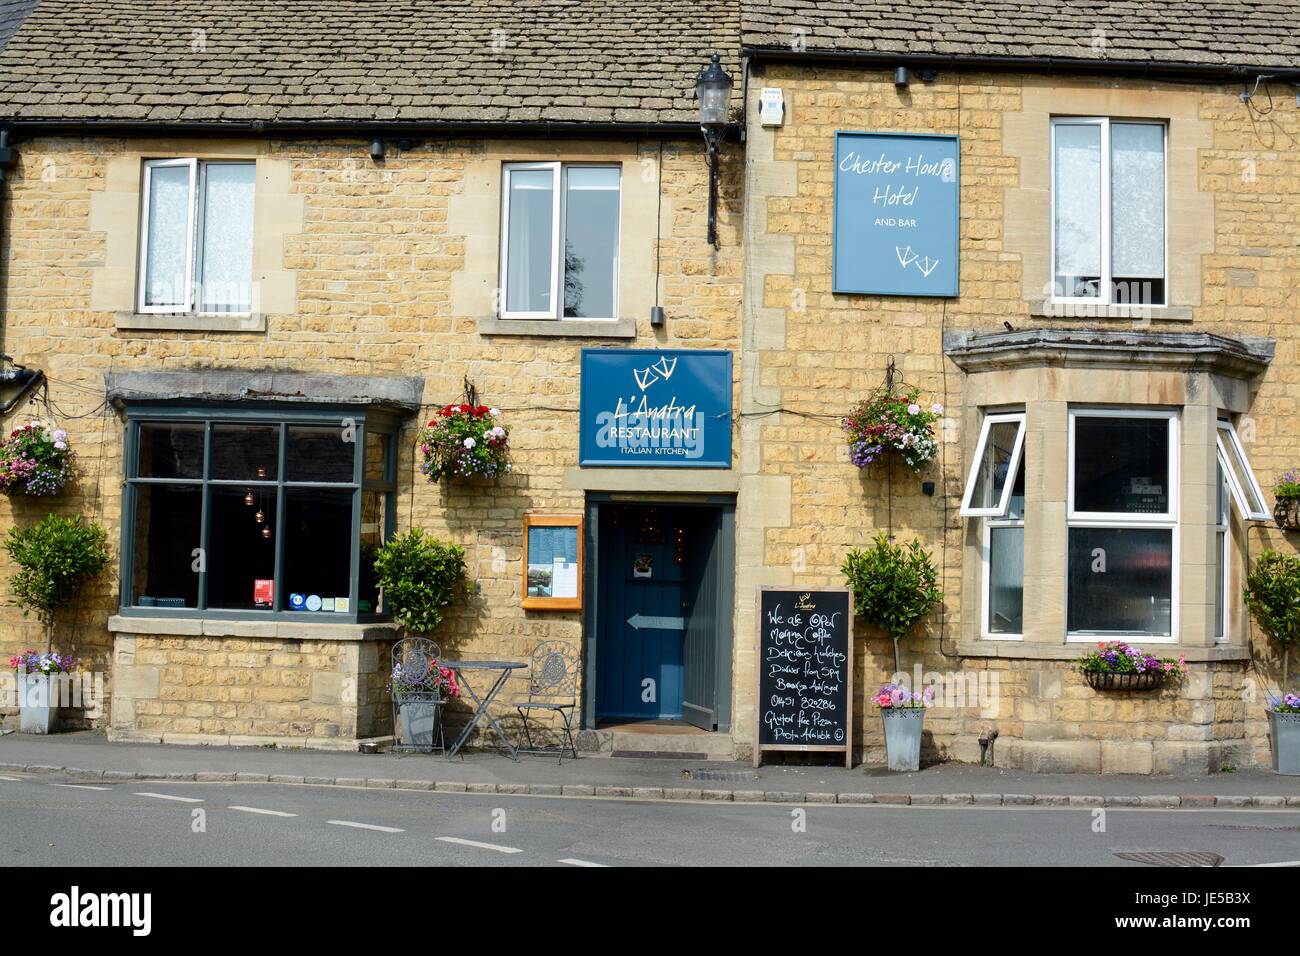 L'Abattra restaurant in Bourton on the Water,Cotswolds,England Stock Photo